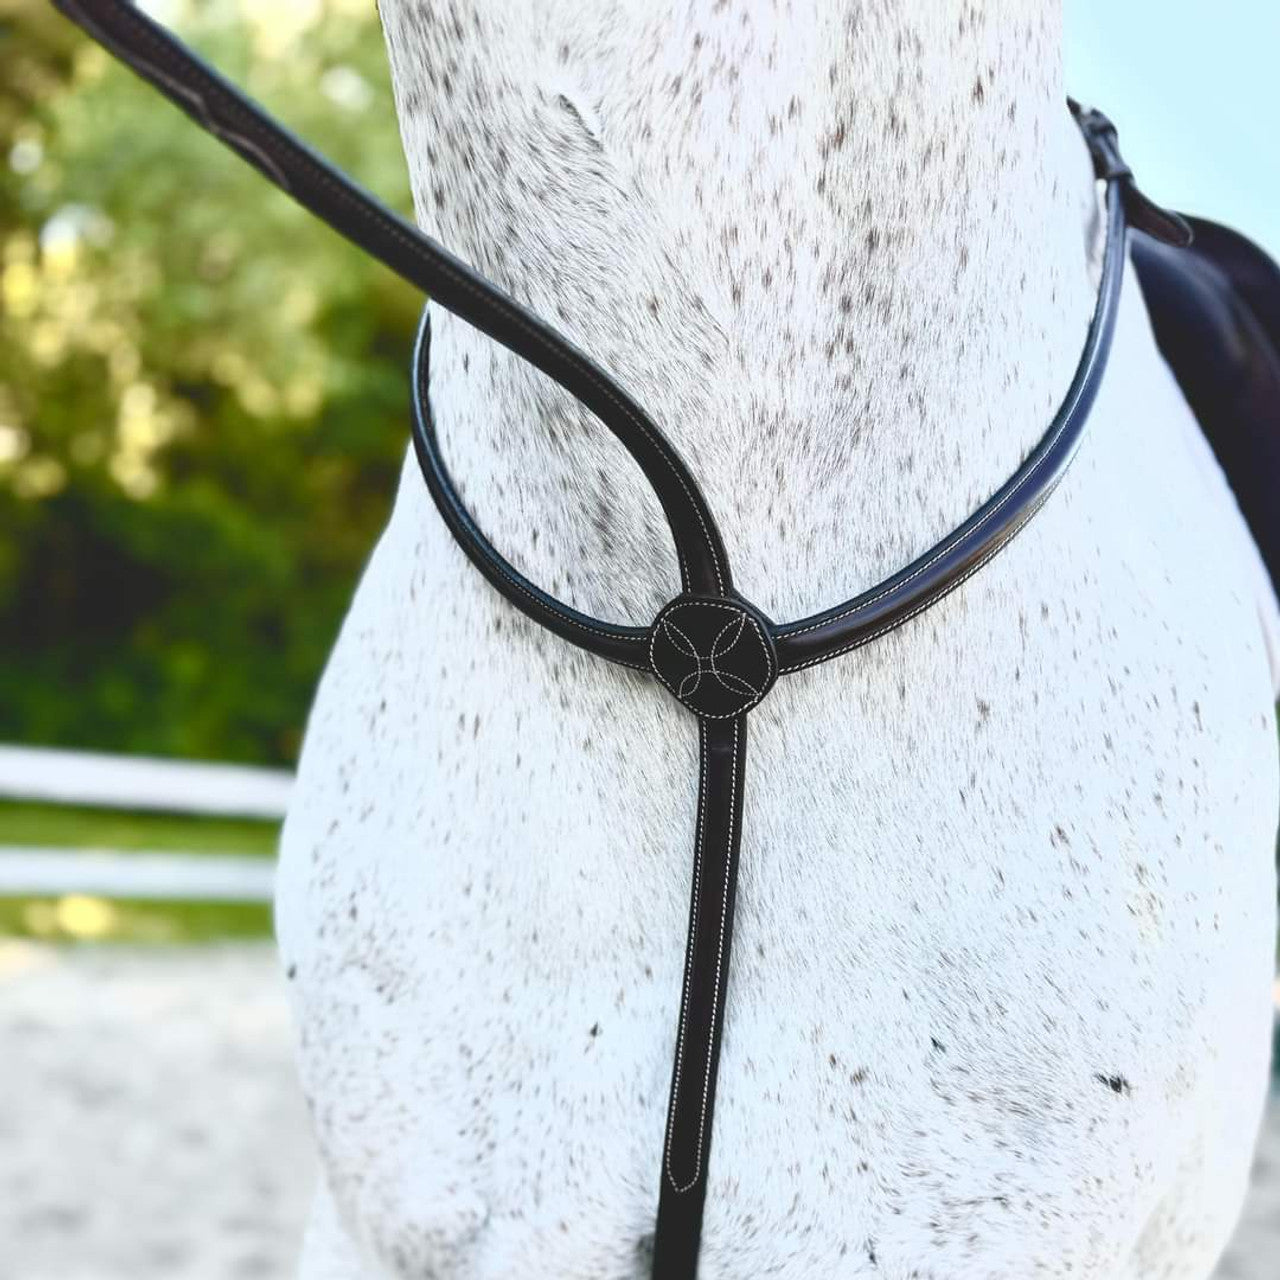 Red Barn "No Donut" Round Raised Fancy Standing Martingale